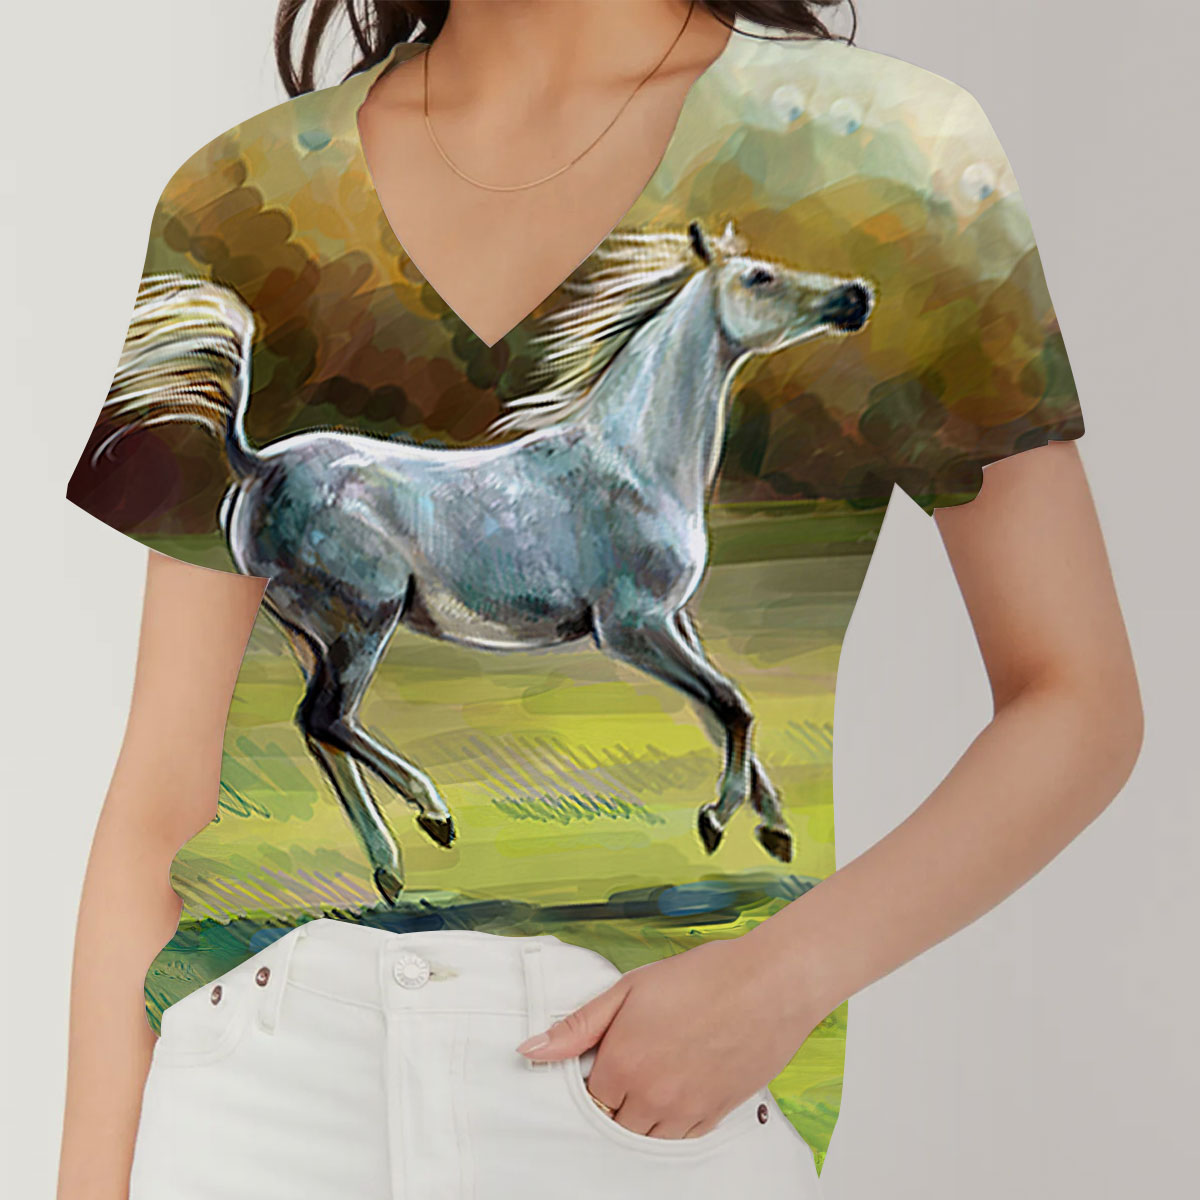 Drawing Of Horse V-Neck Women's T-Shirt_1_2.1